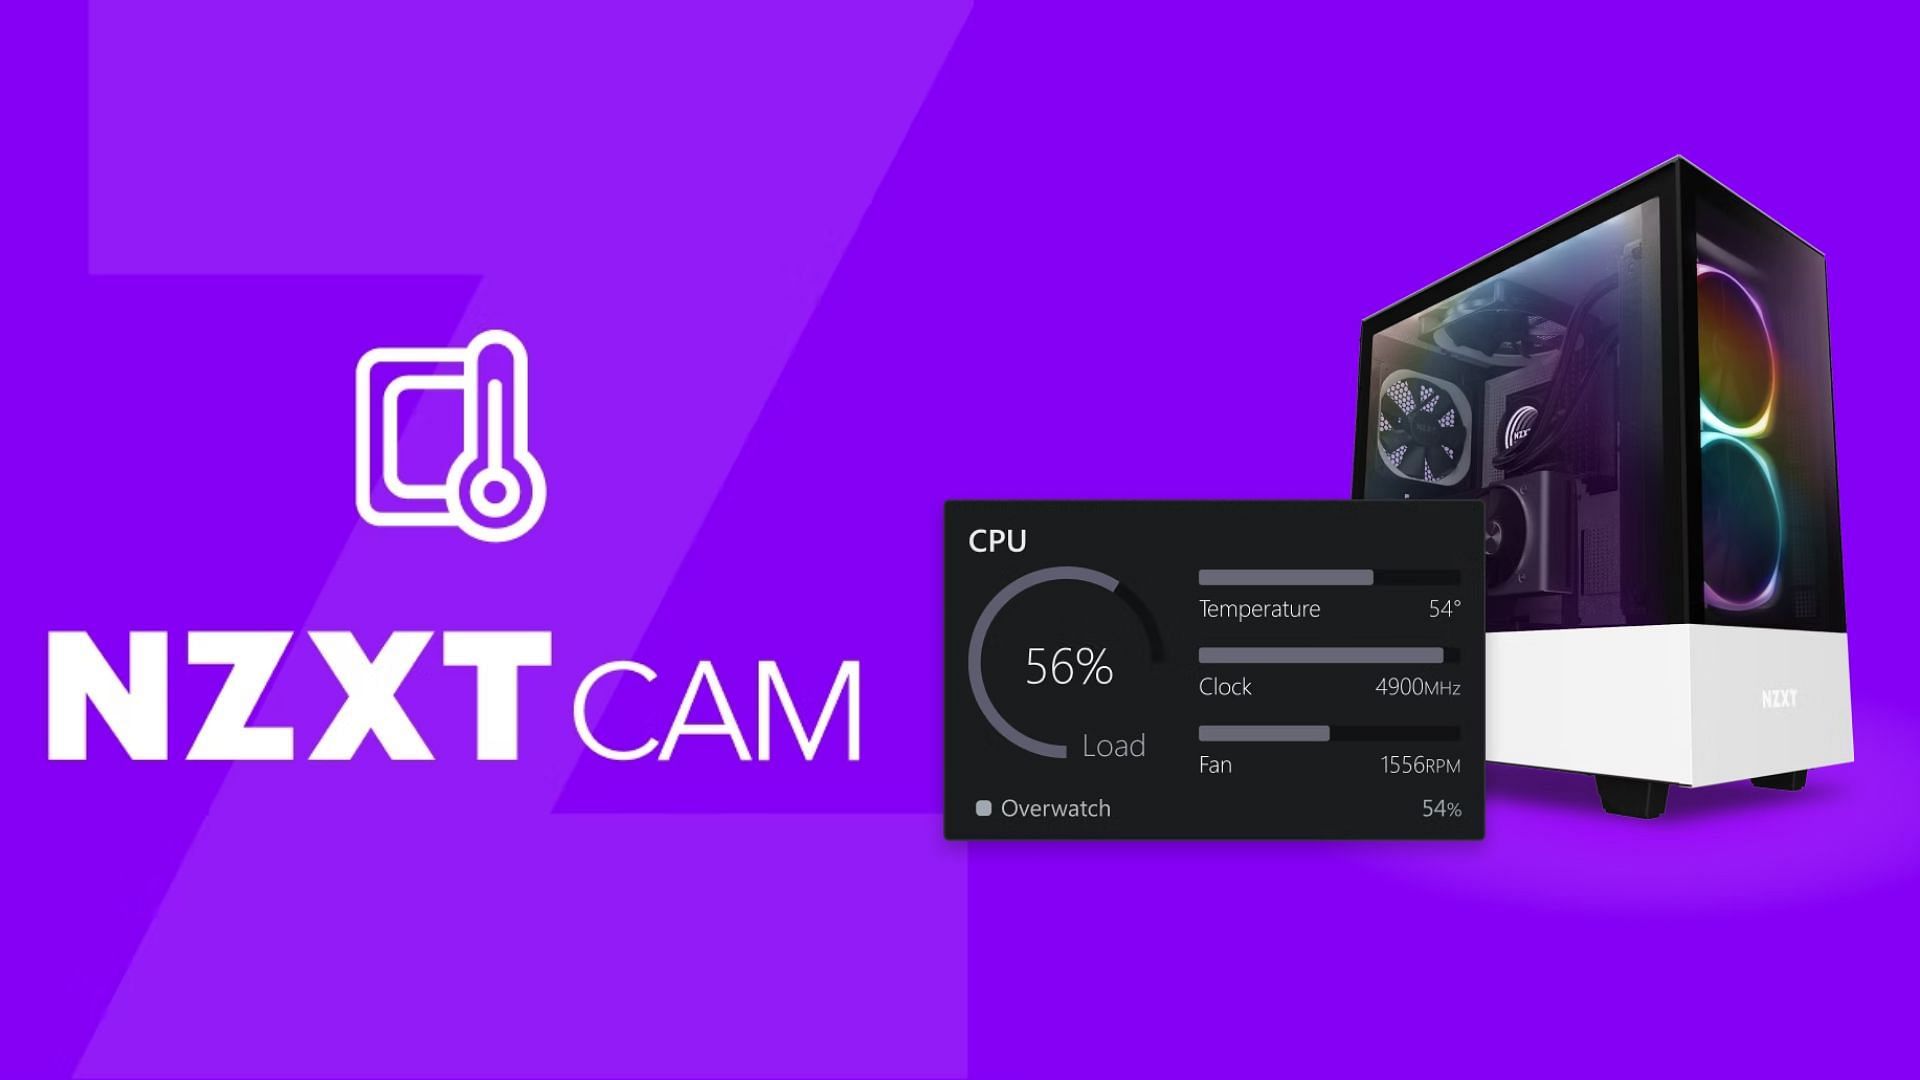 How to set up NZXT CAM